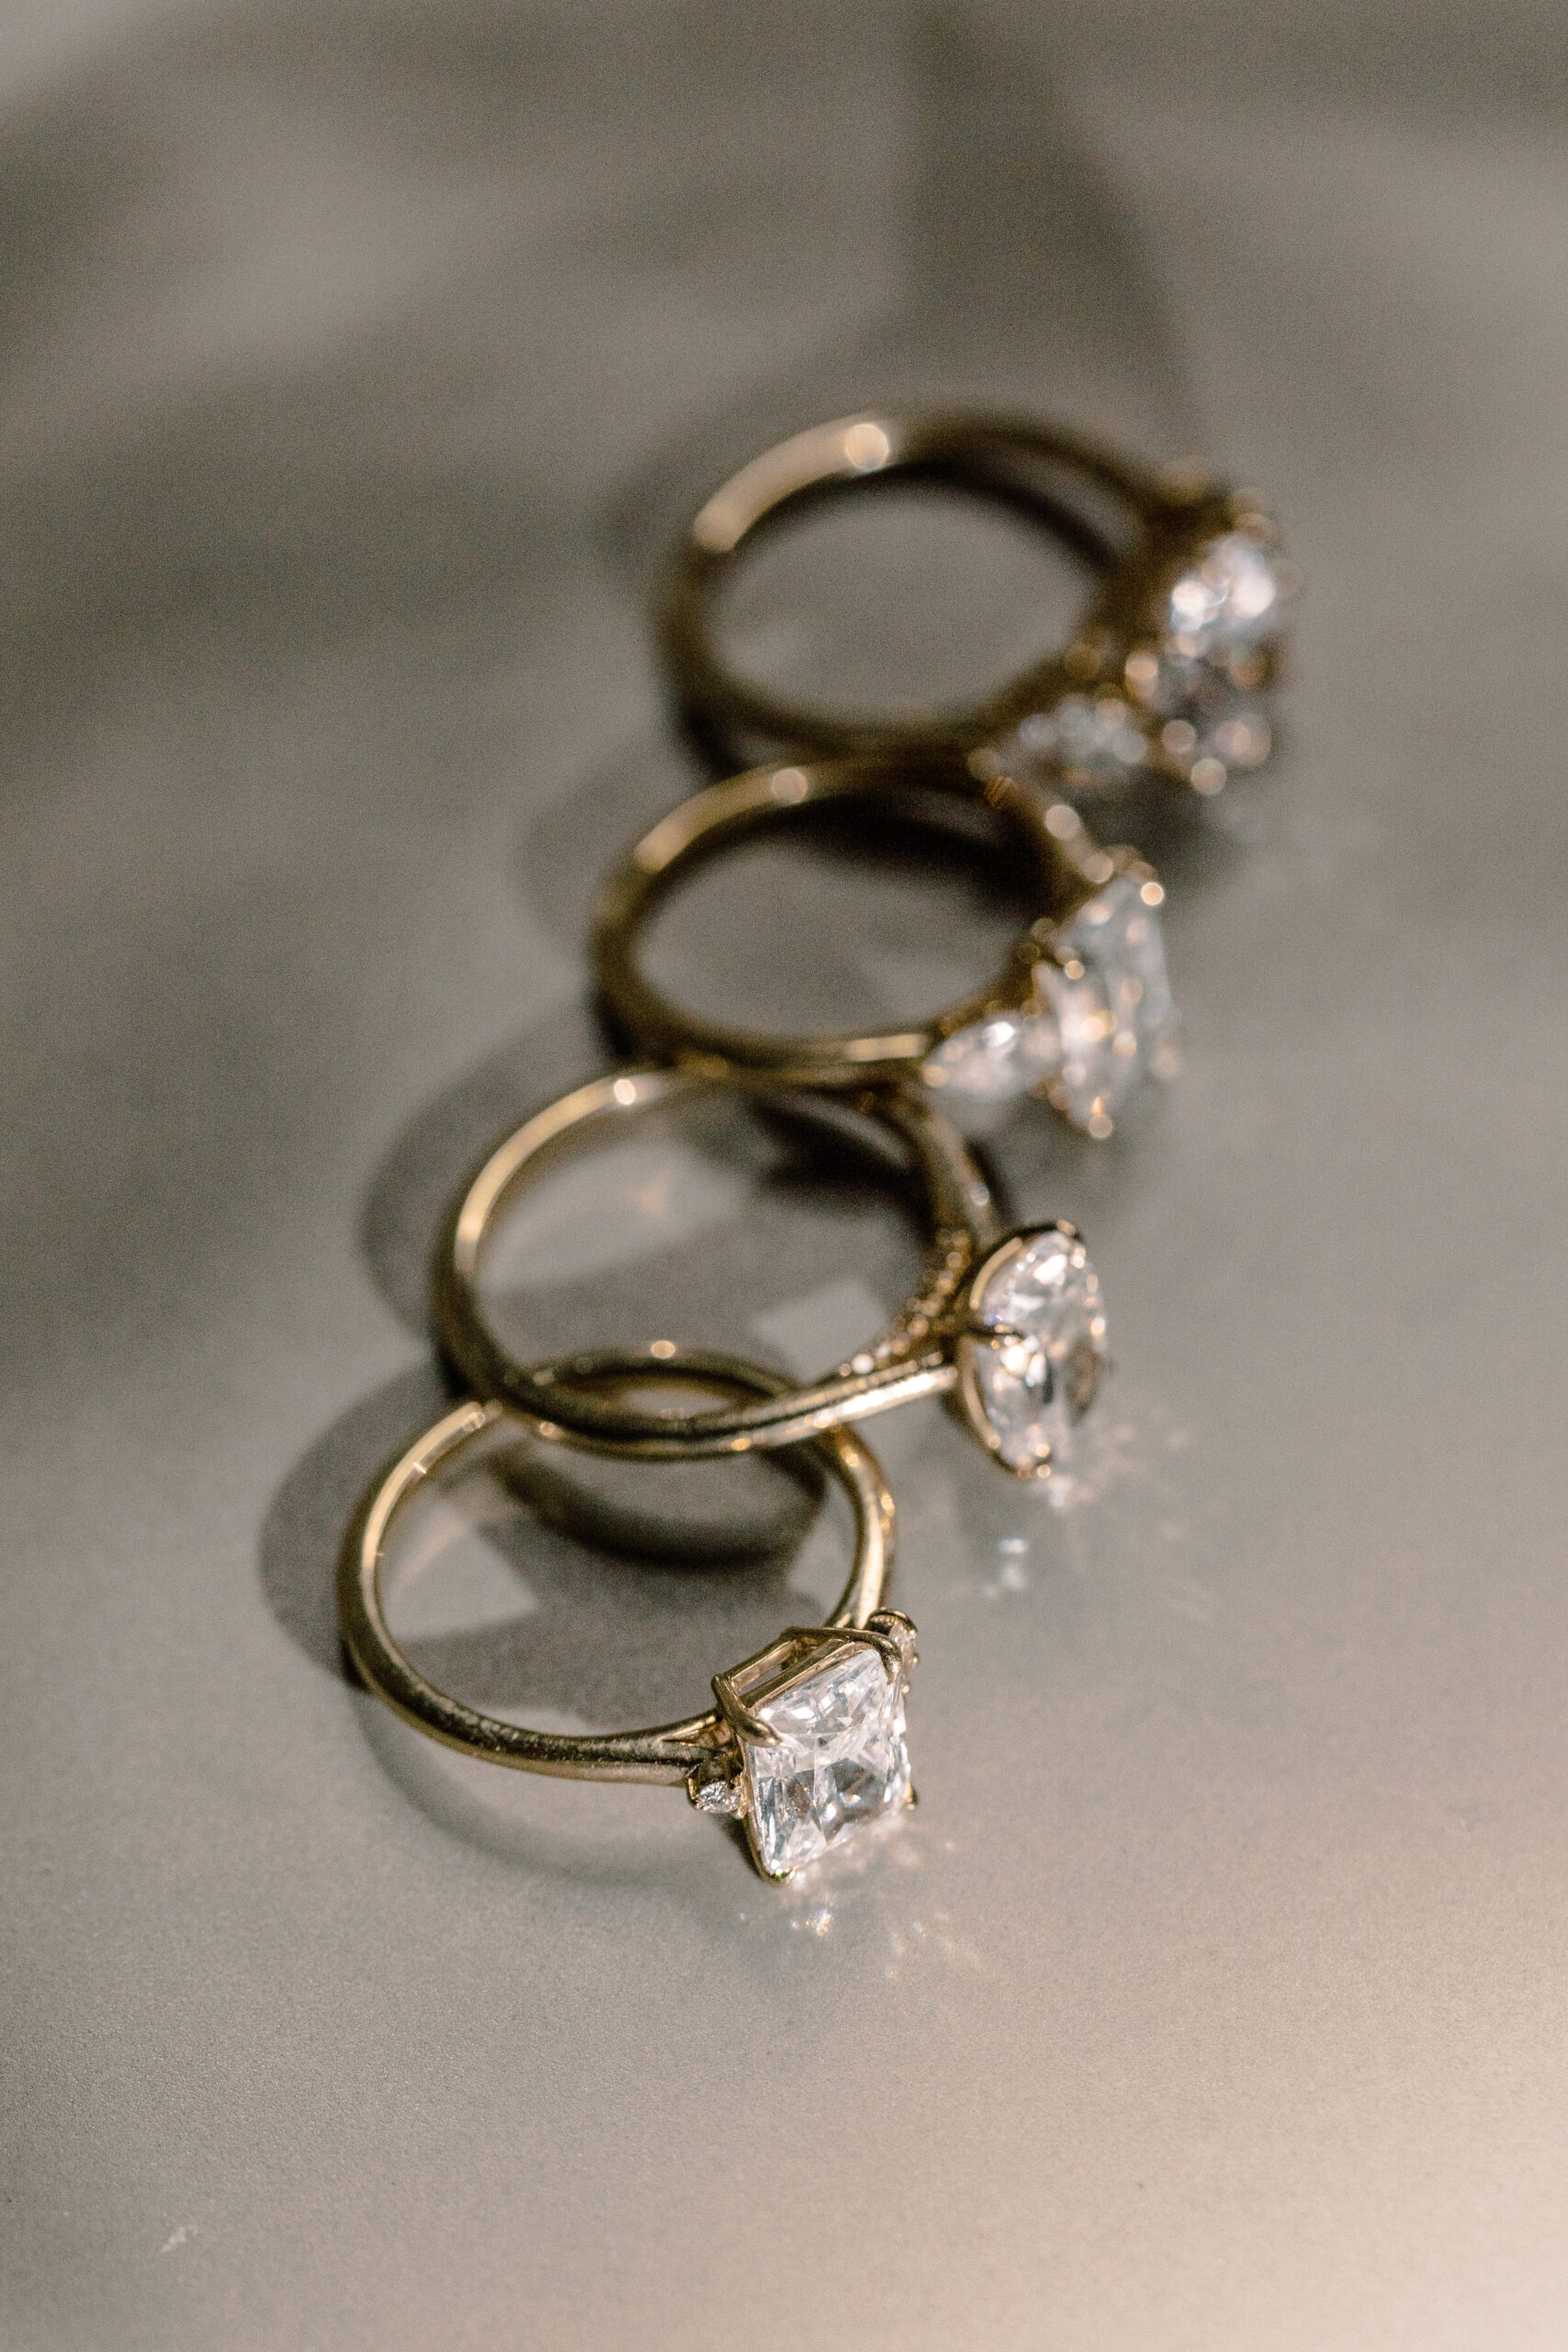 Four diamond rings stacked on top of each other, perfect for the wedding season.